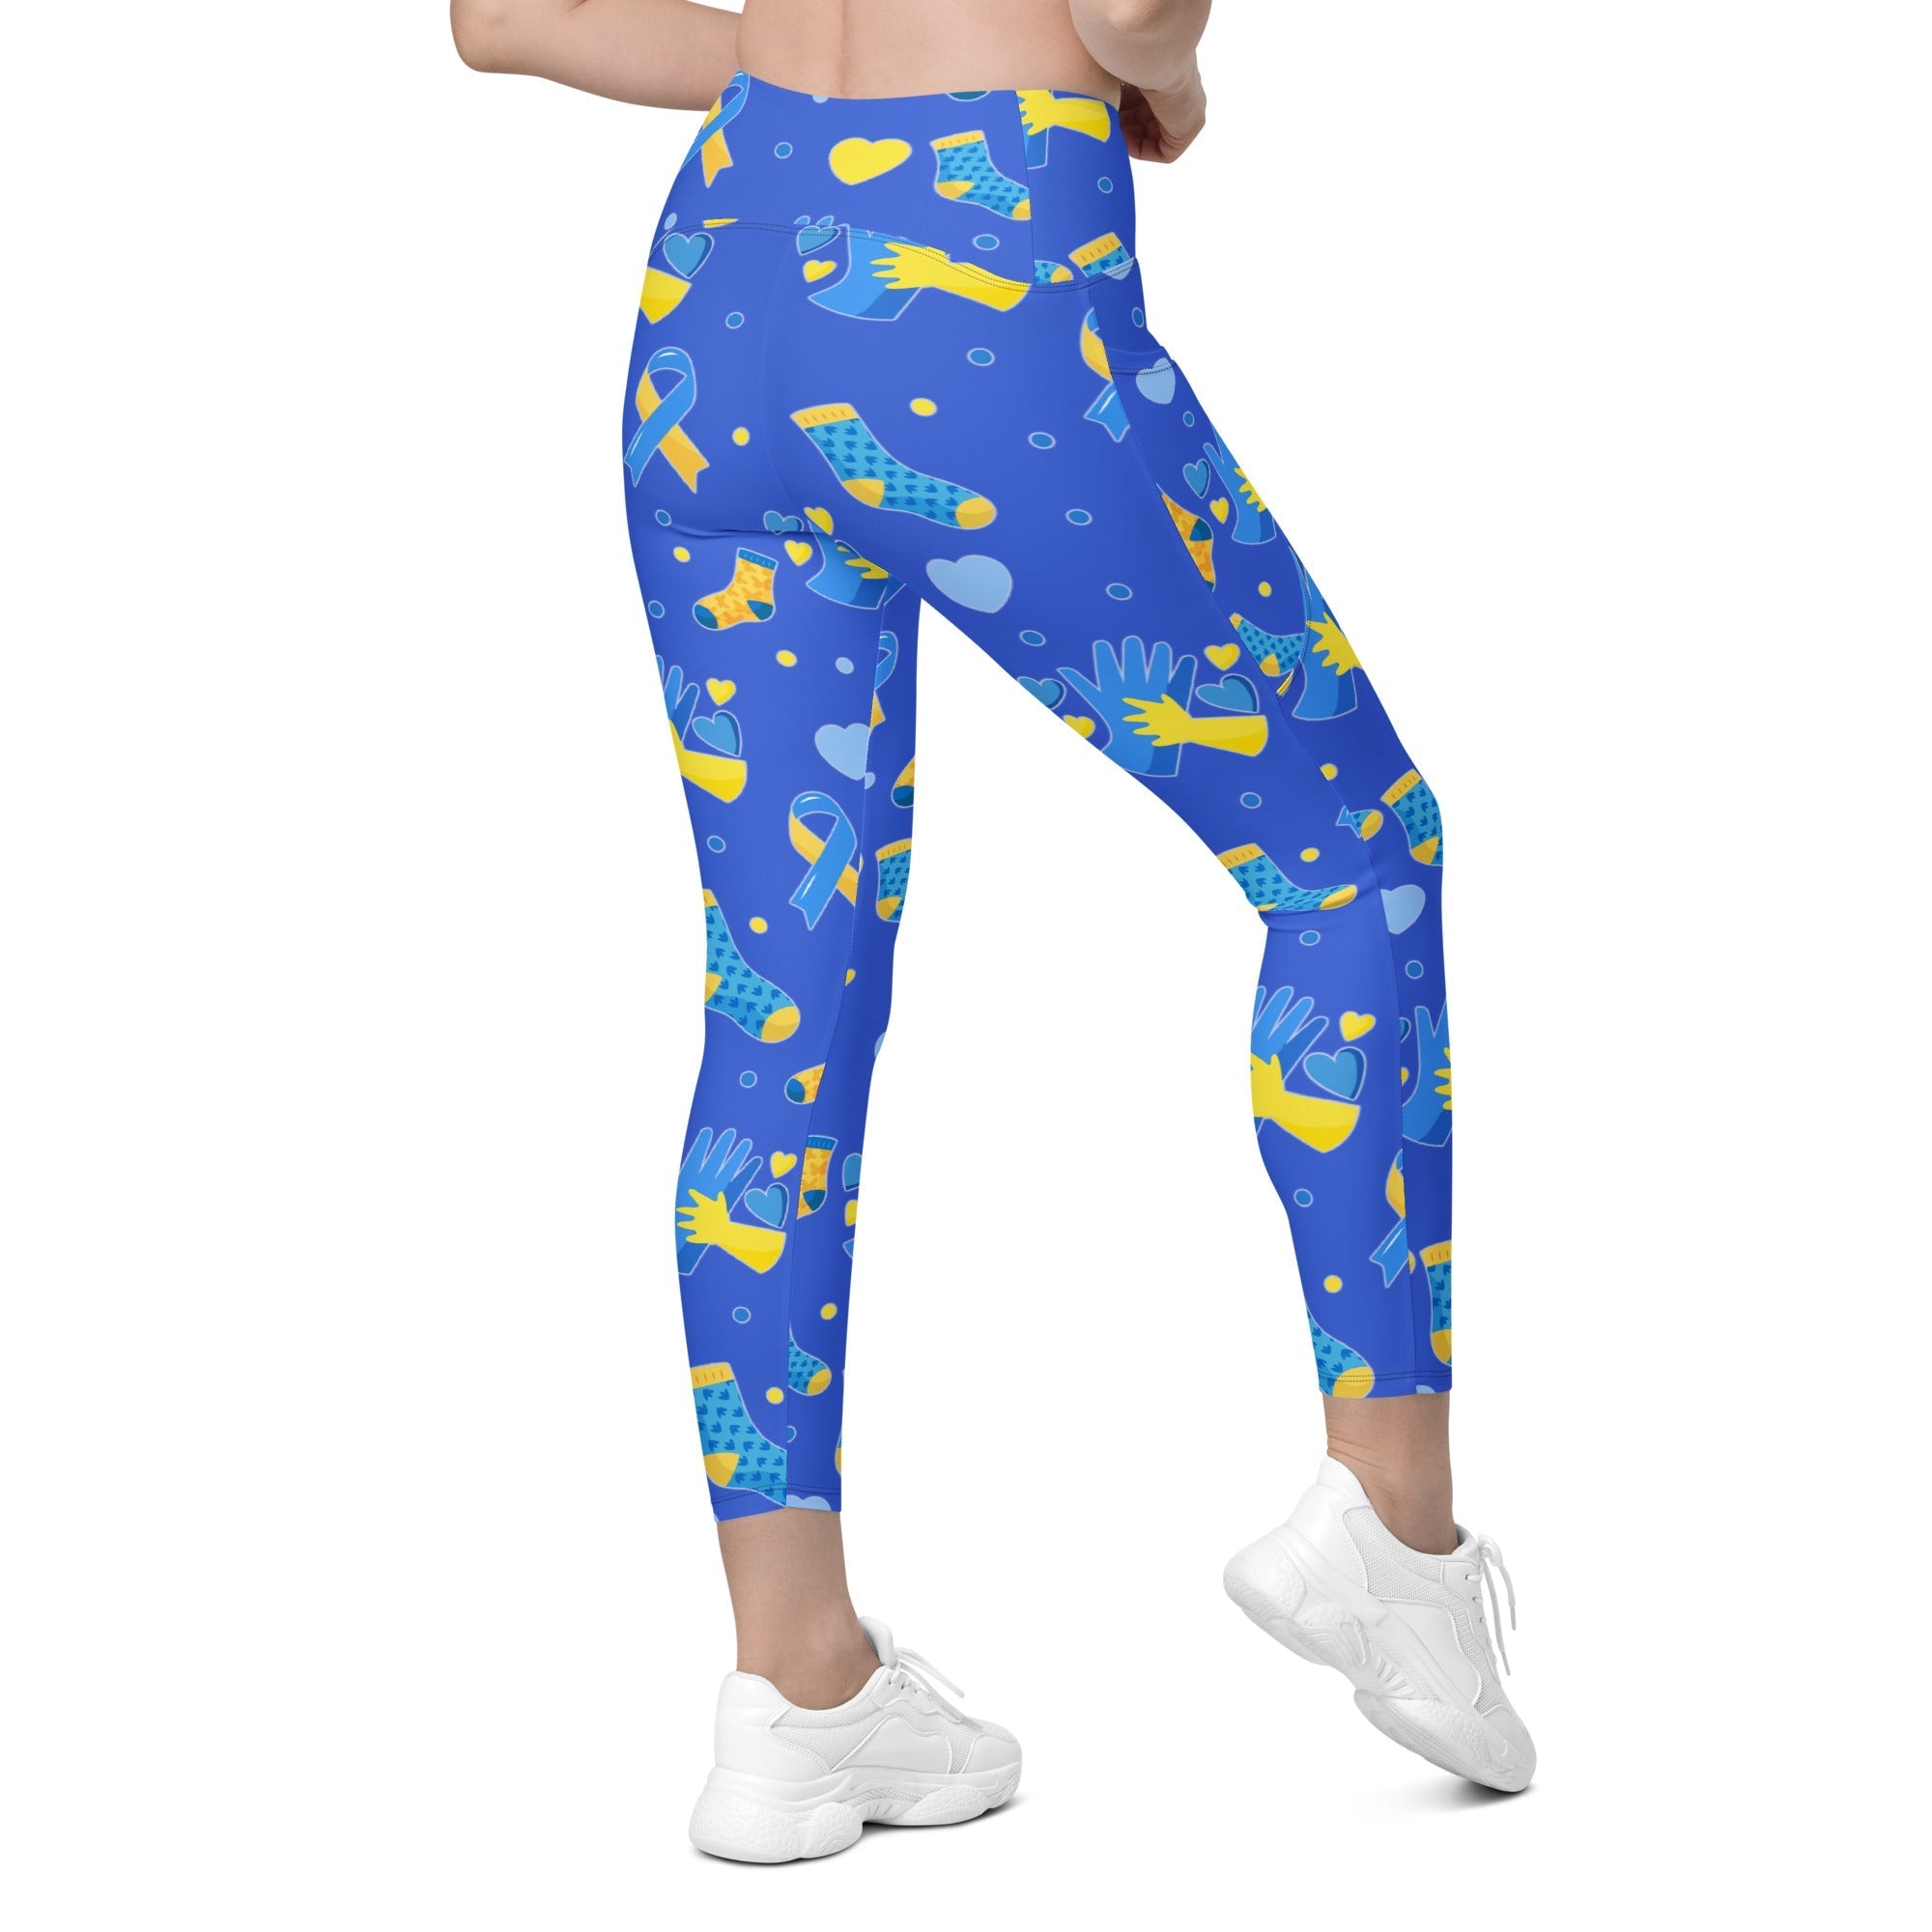 Down Syndrome Awareness Leggings With Pockets